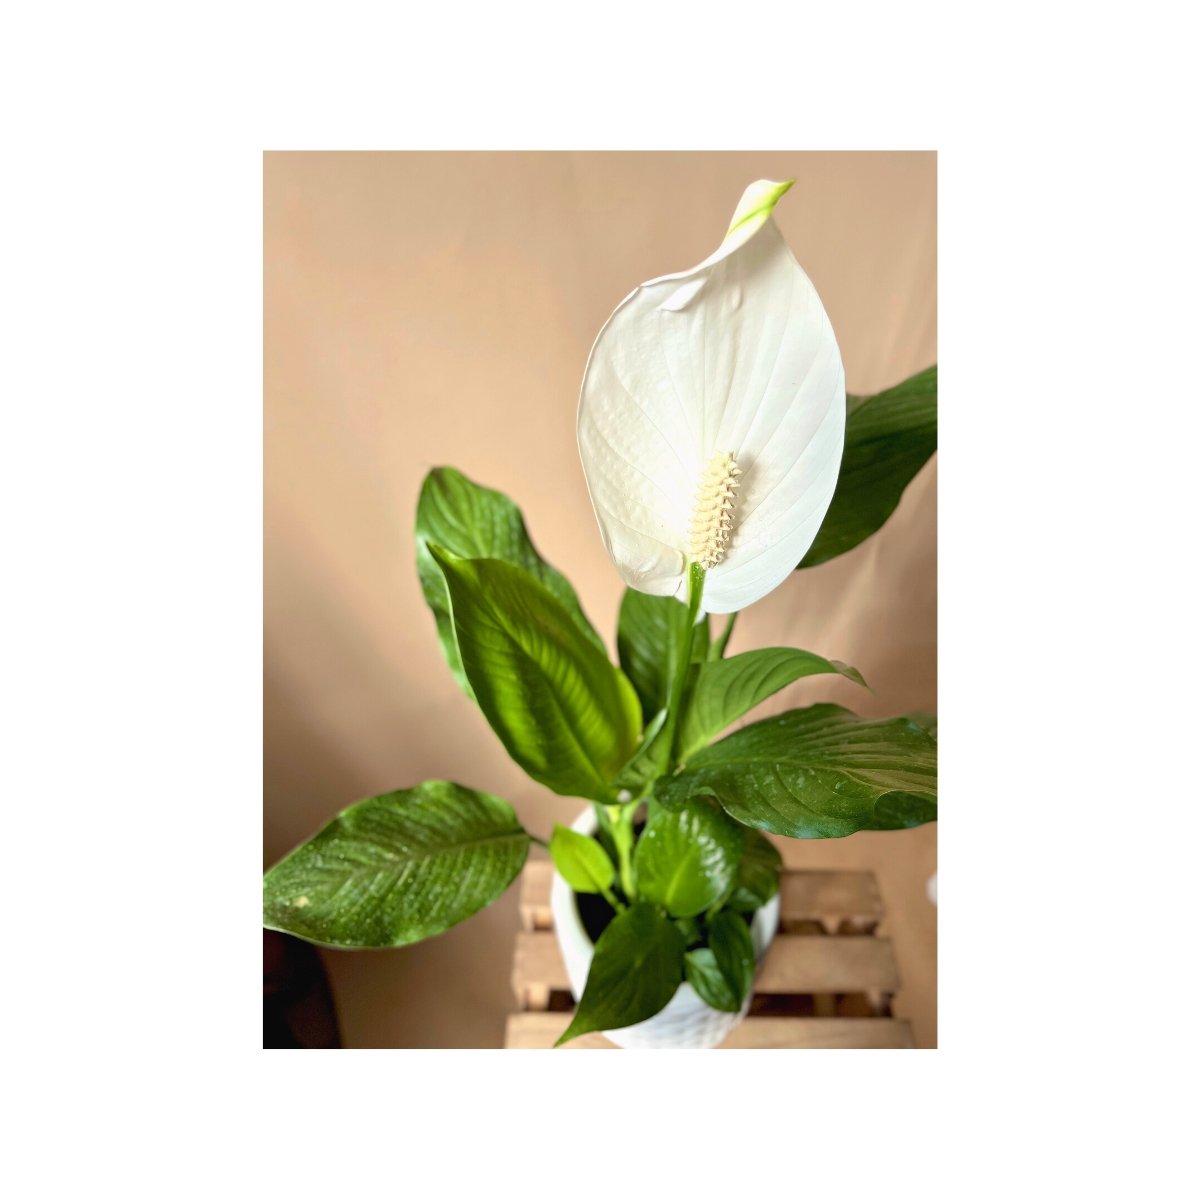 Mega Peace Spathiphyllum in White Seashell Planter - Gifting plant - Tumbleweed Plants - Online Plant Delivery Singapore